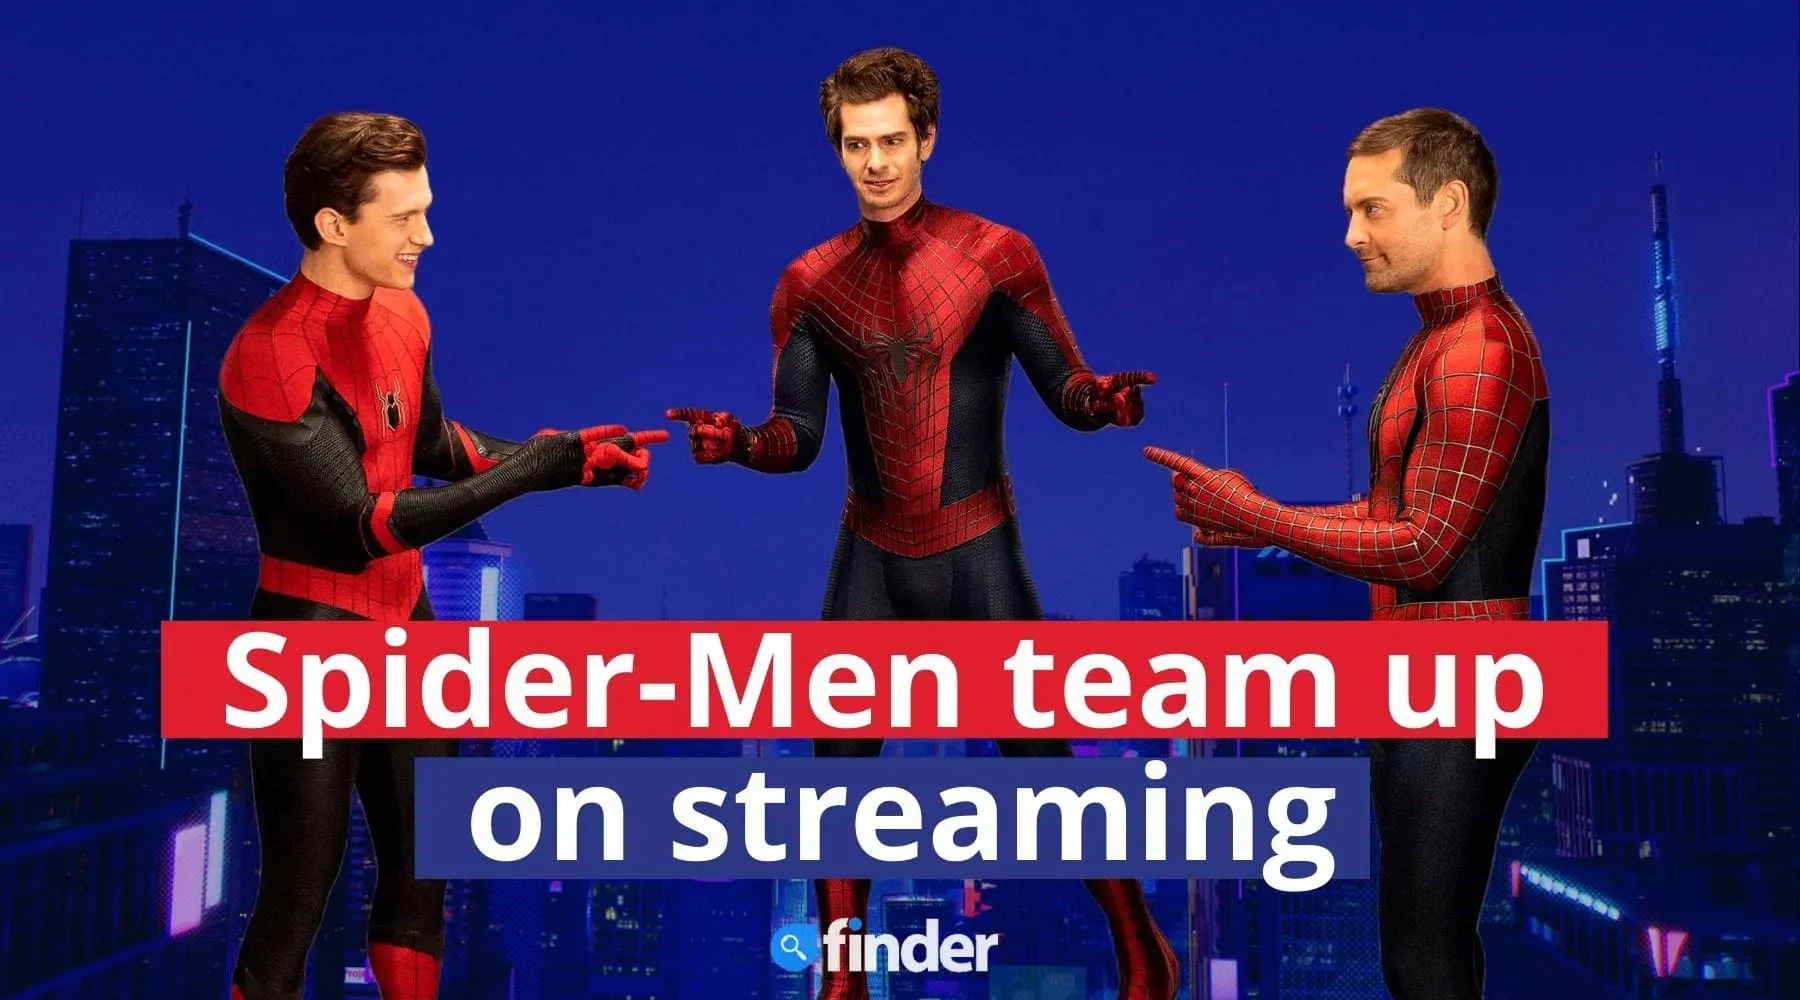  You can now watch nearly all Spider-Man movies on 1 streaming service